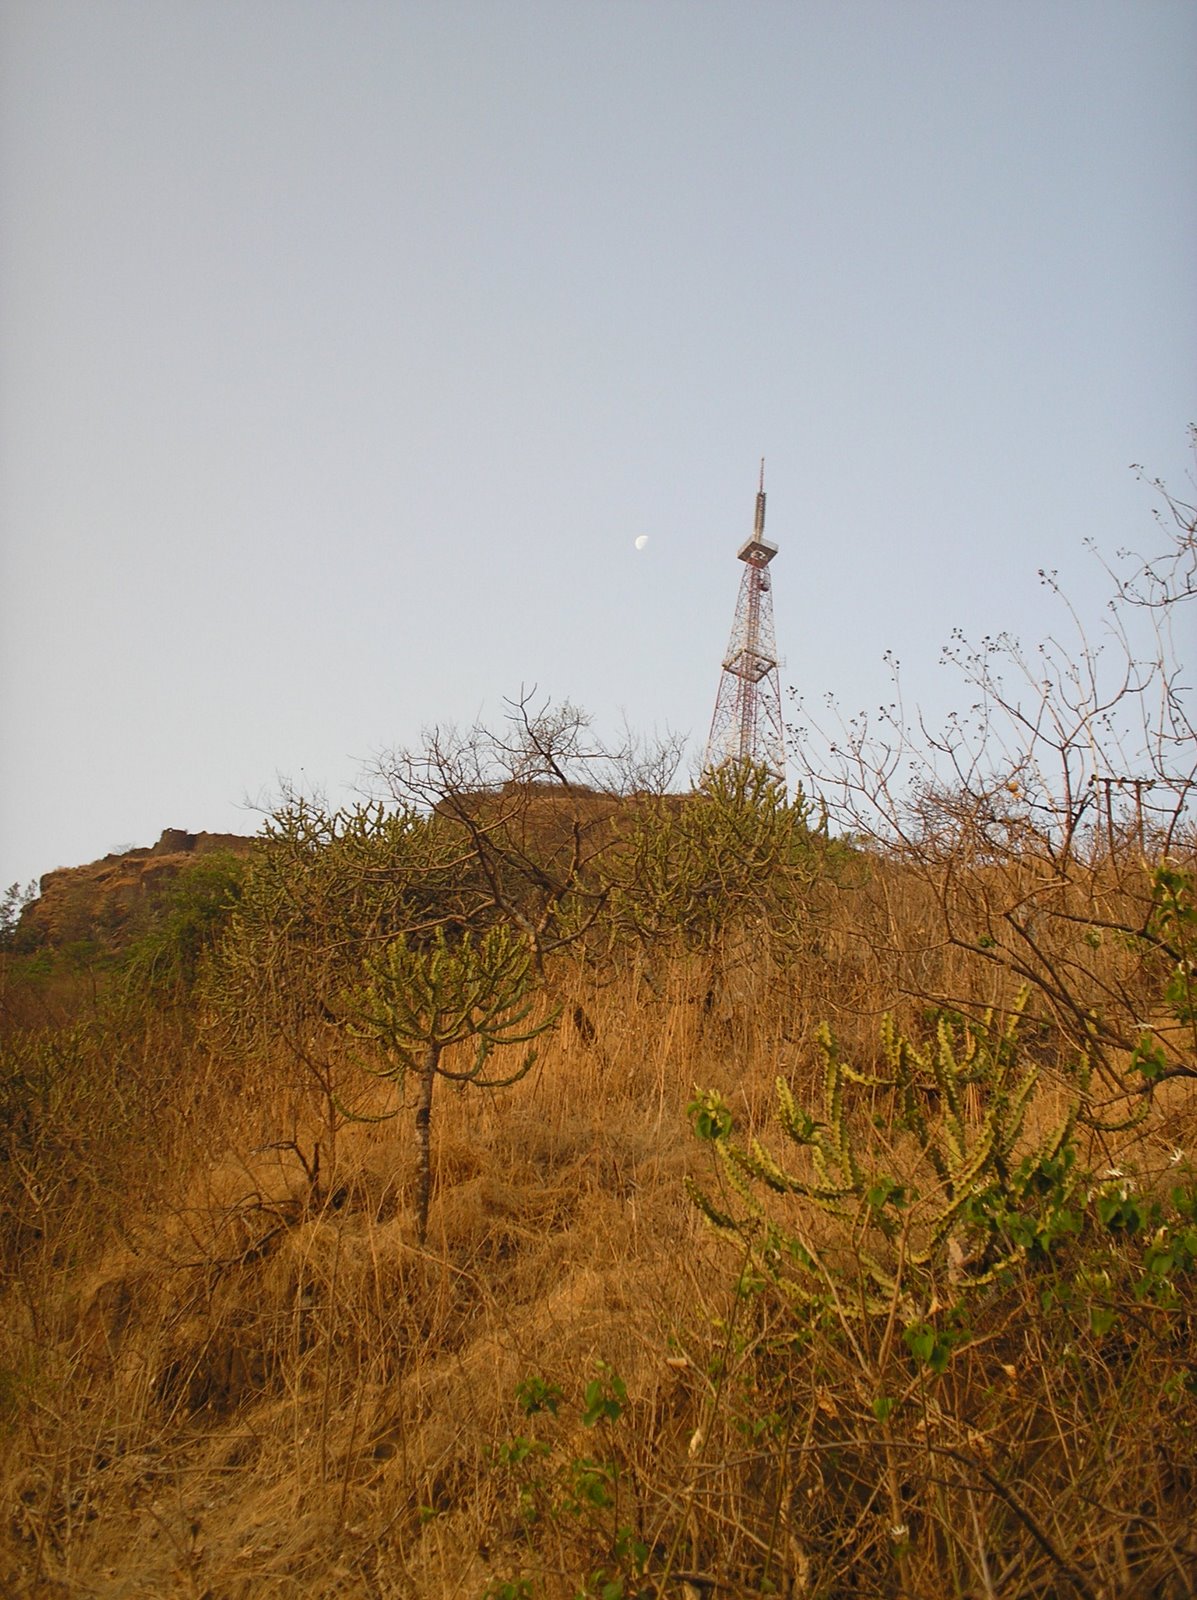 [sinhgad+note+the+tower+and+the+moon.JPG]